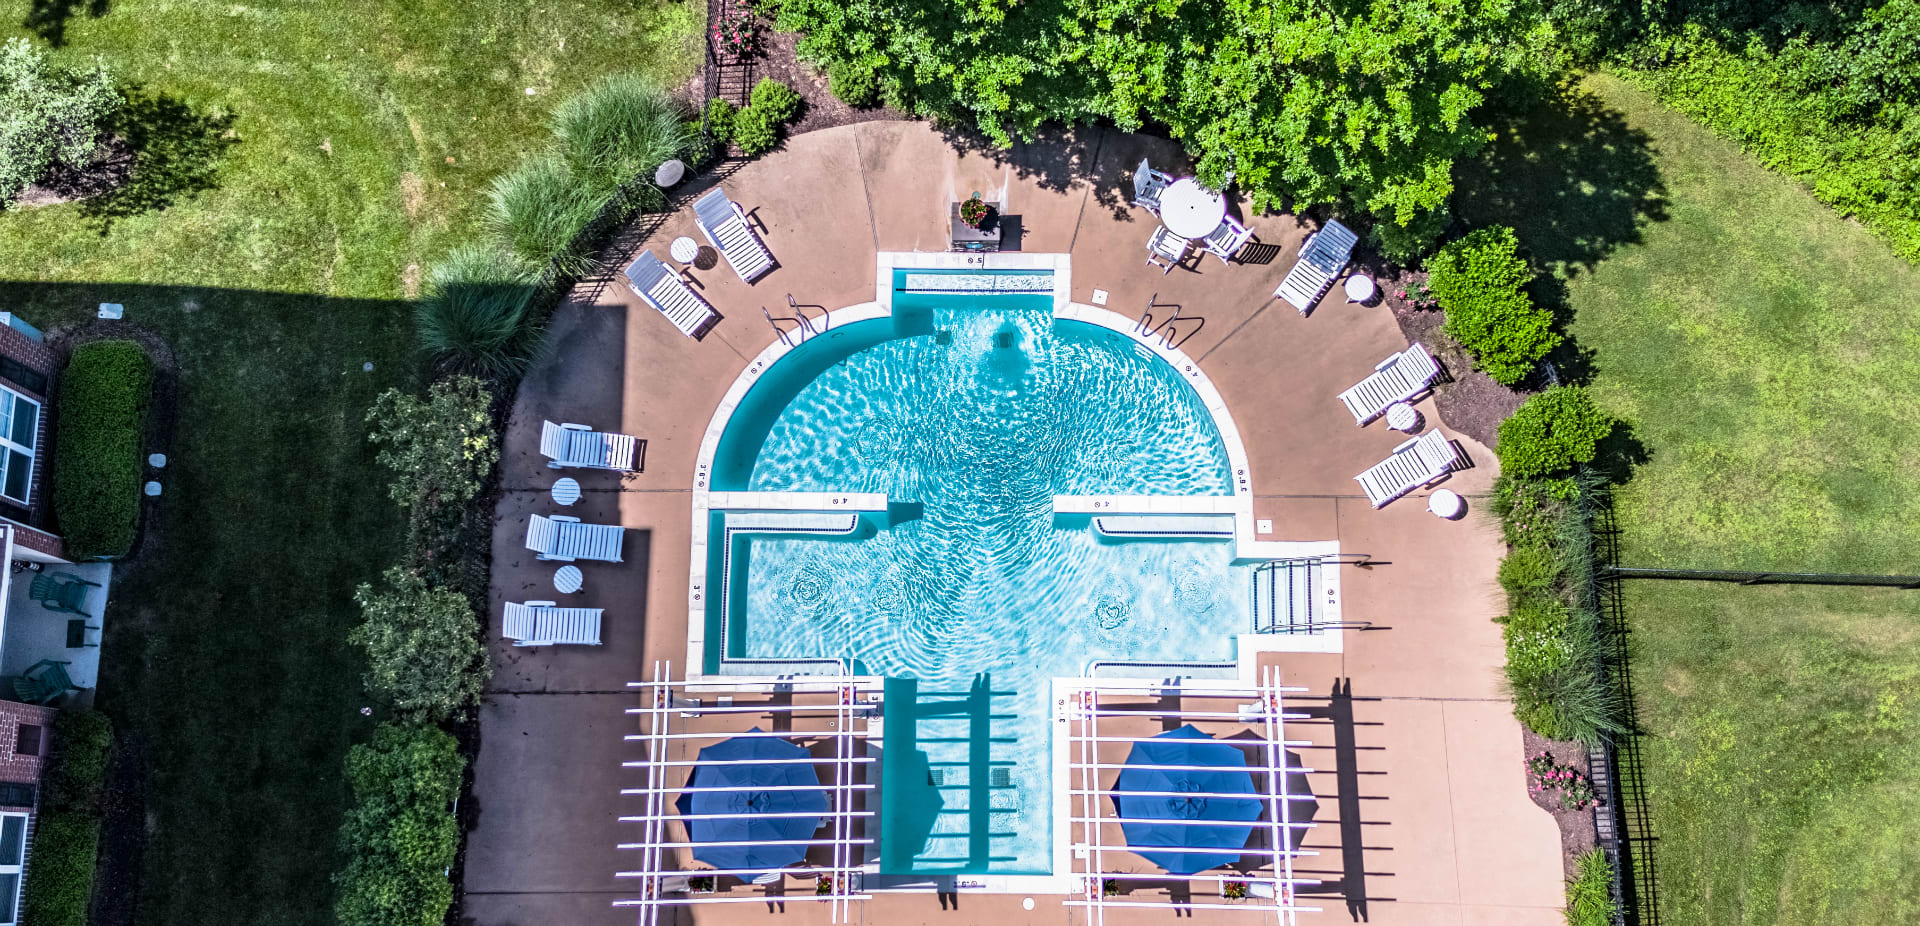 Seasonal pool and tanning deck within steps from your apartment backdoor. Enjoy luscious green space and the beauty of nature every day at Alexander Heights.